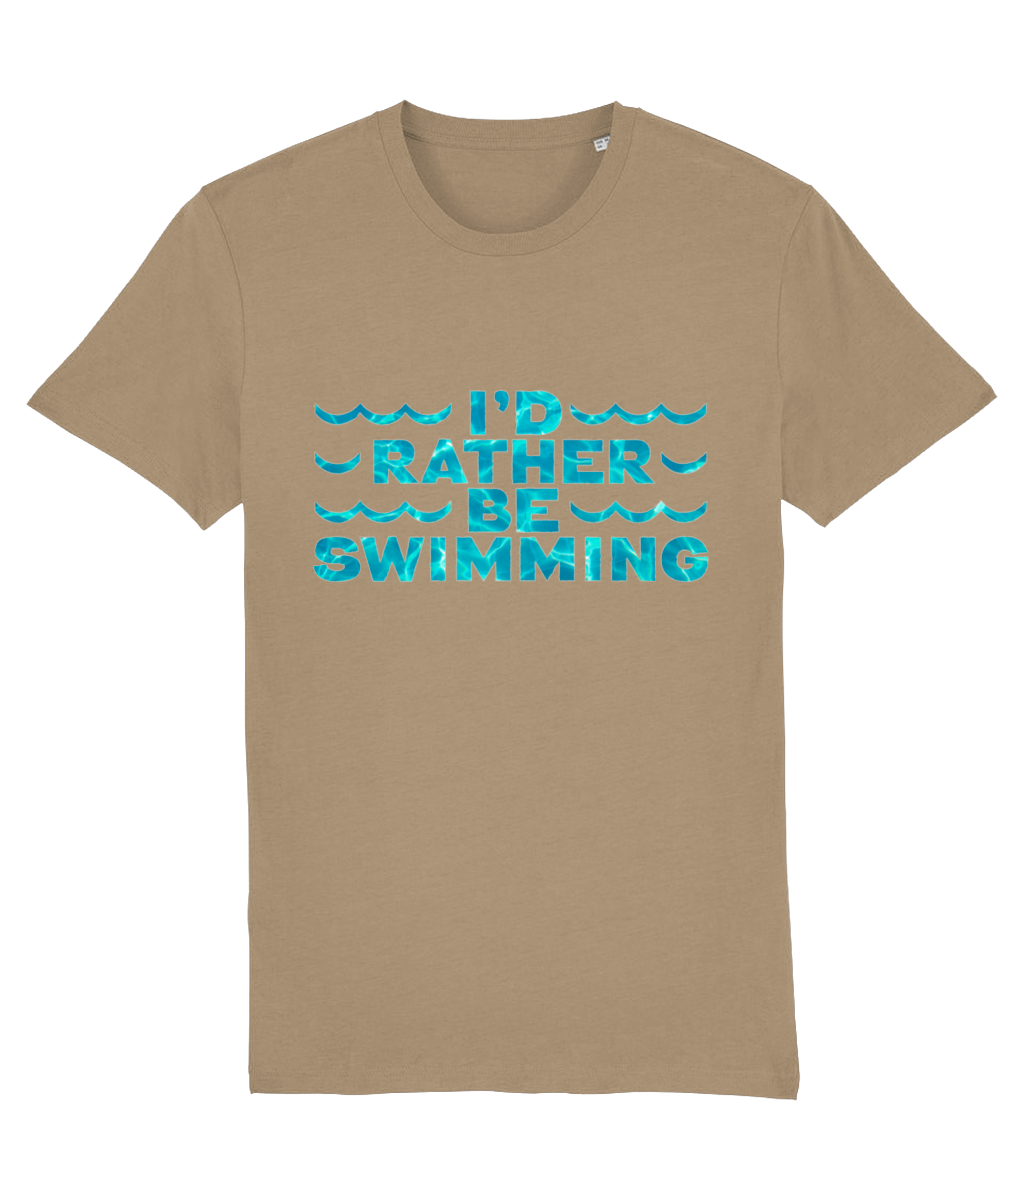 I'D RATHER BE SWIMMING - Unisex t-shirt